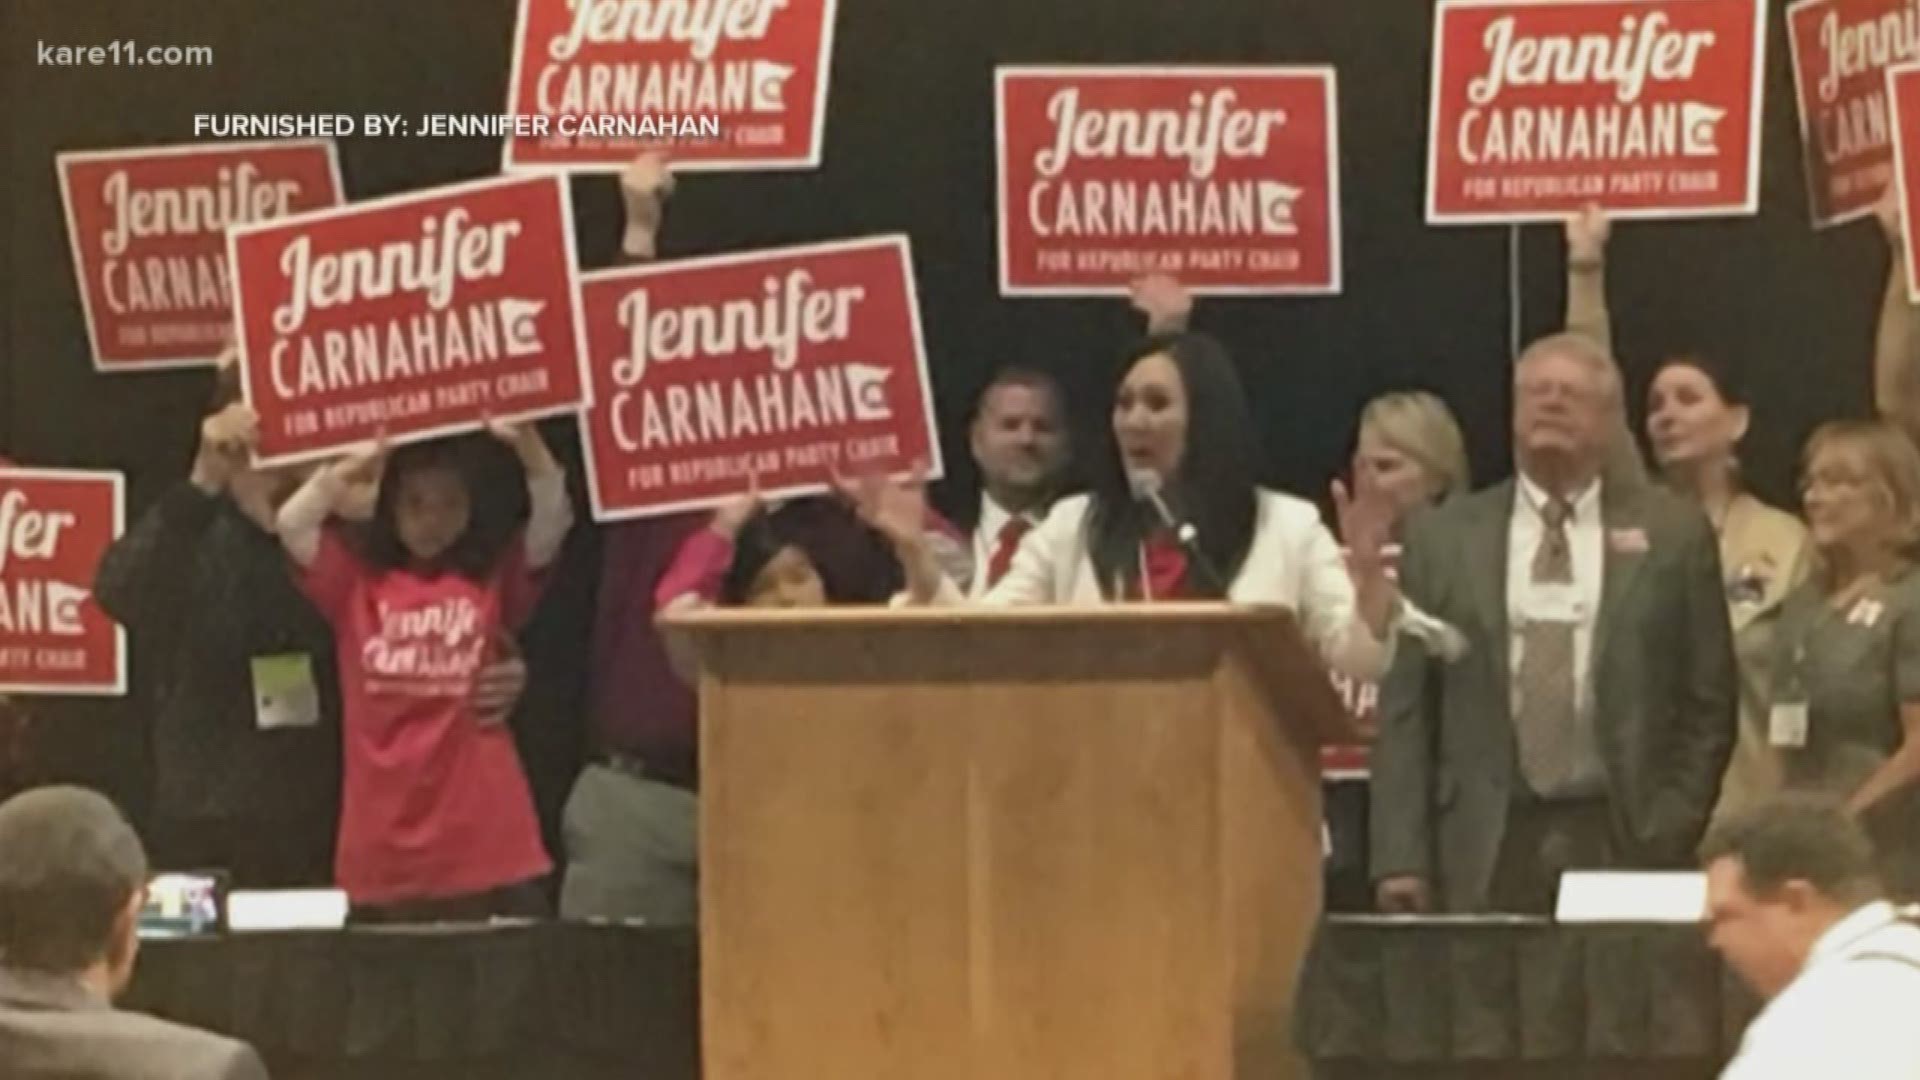 Minnesota Republican Party Chair Jennifer Carnahan is running for re-election. She shares some of her backstory with KARE 11's Adrienne Broaddus. https://kare11.tv/2IW3S3o